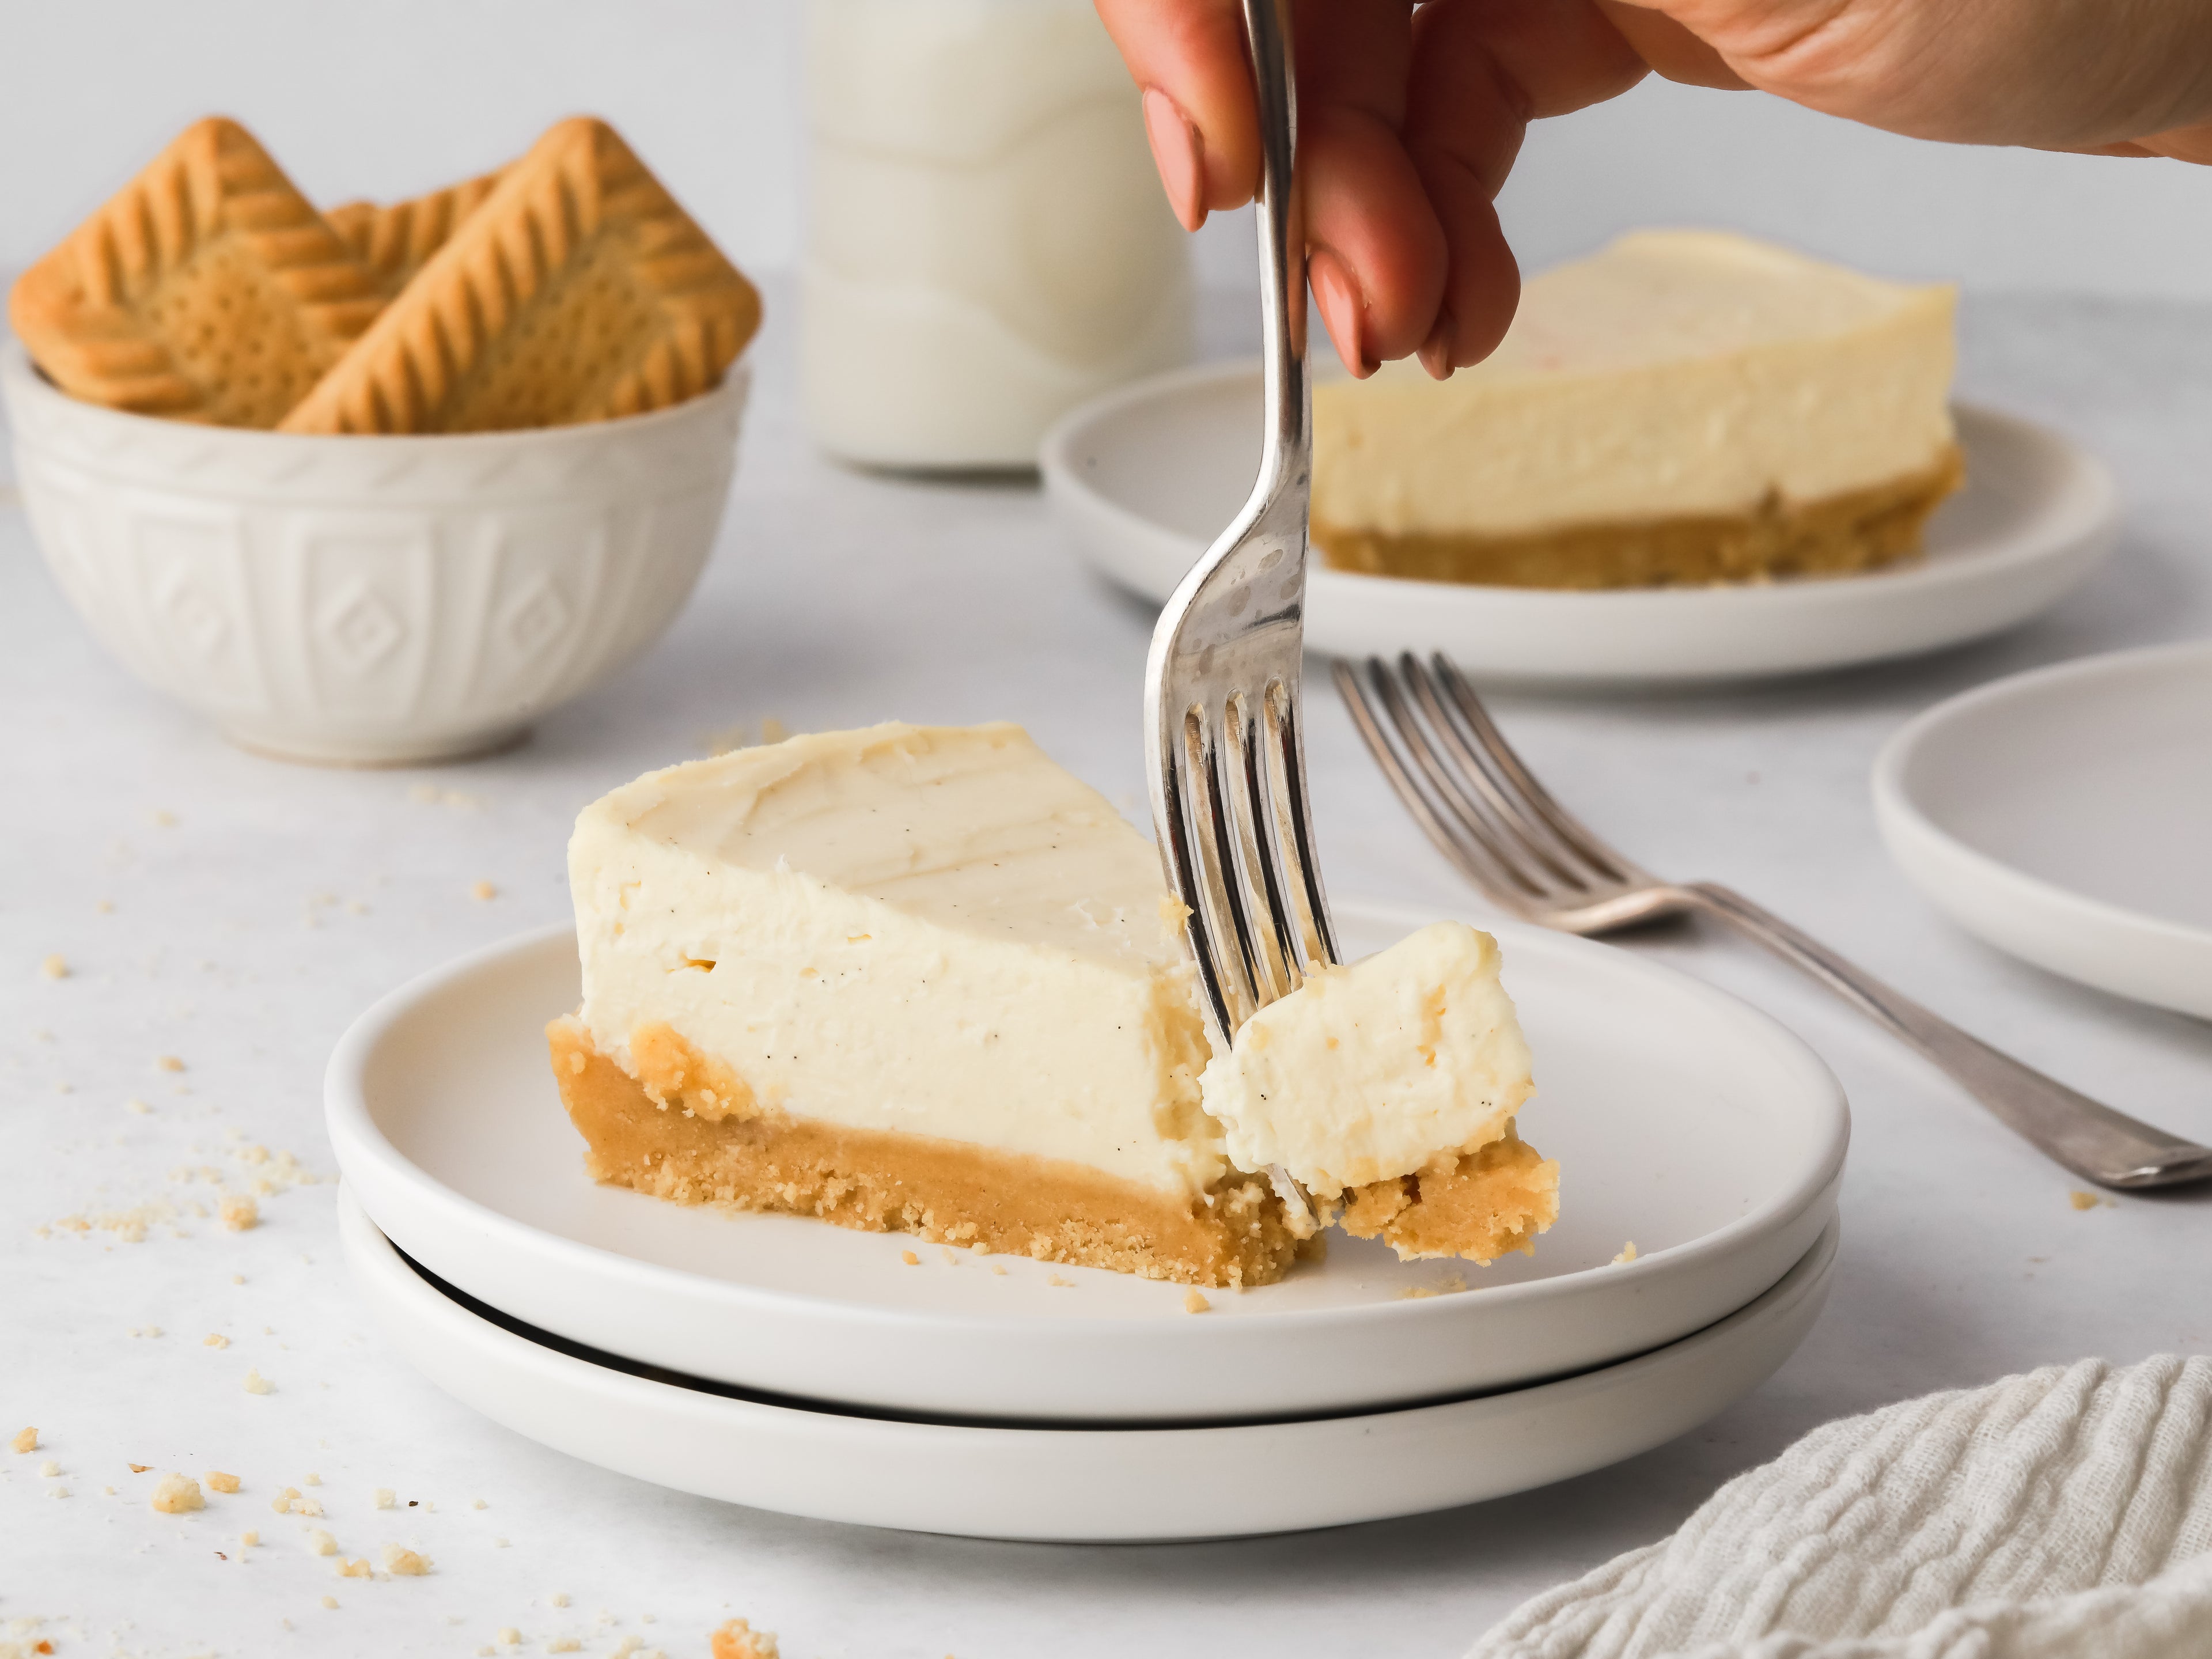 Fork taking a bite out of a slice of vanilla cheesecake